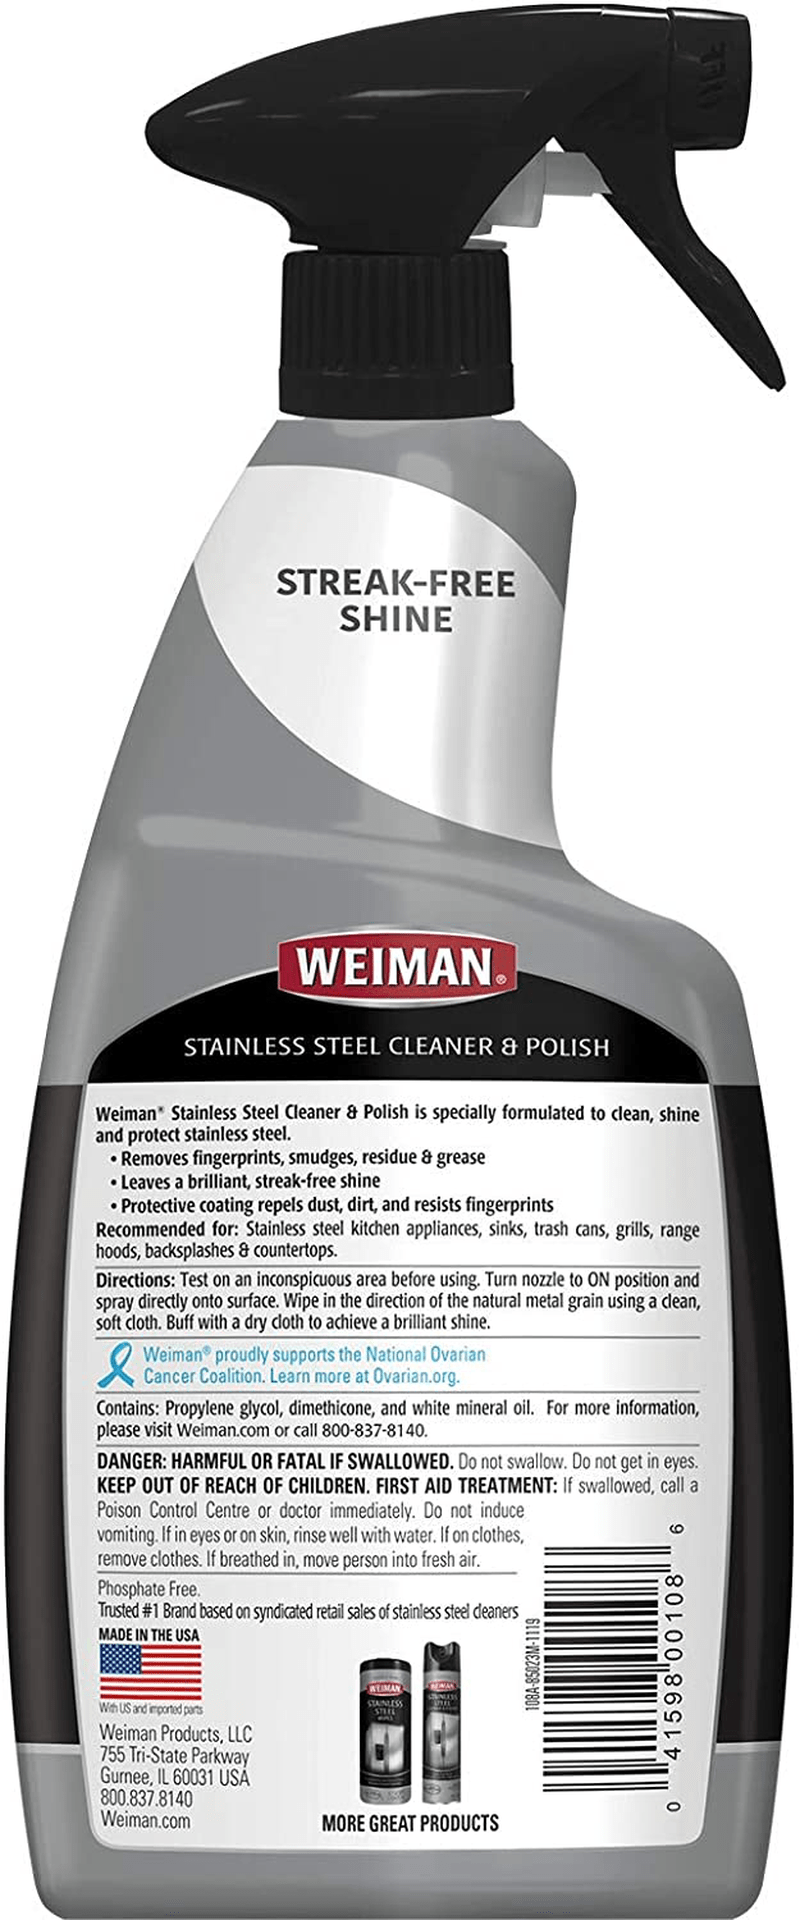 Weiman Stainless Steel Cleaner and Polish - 22 Ounces (Microfiber Cloth) - Appliance Surfaces Leave Behind a Brilliant Shine Home & Garden > Household Supplies > Household Cleaning Supplies Weiman   